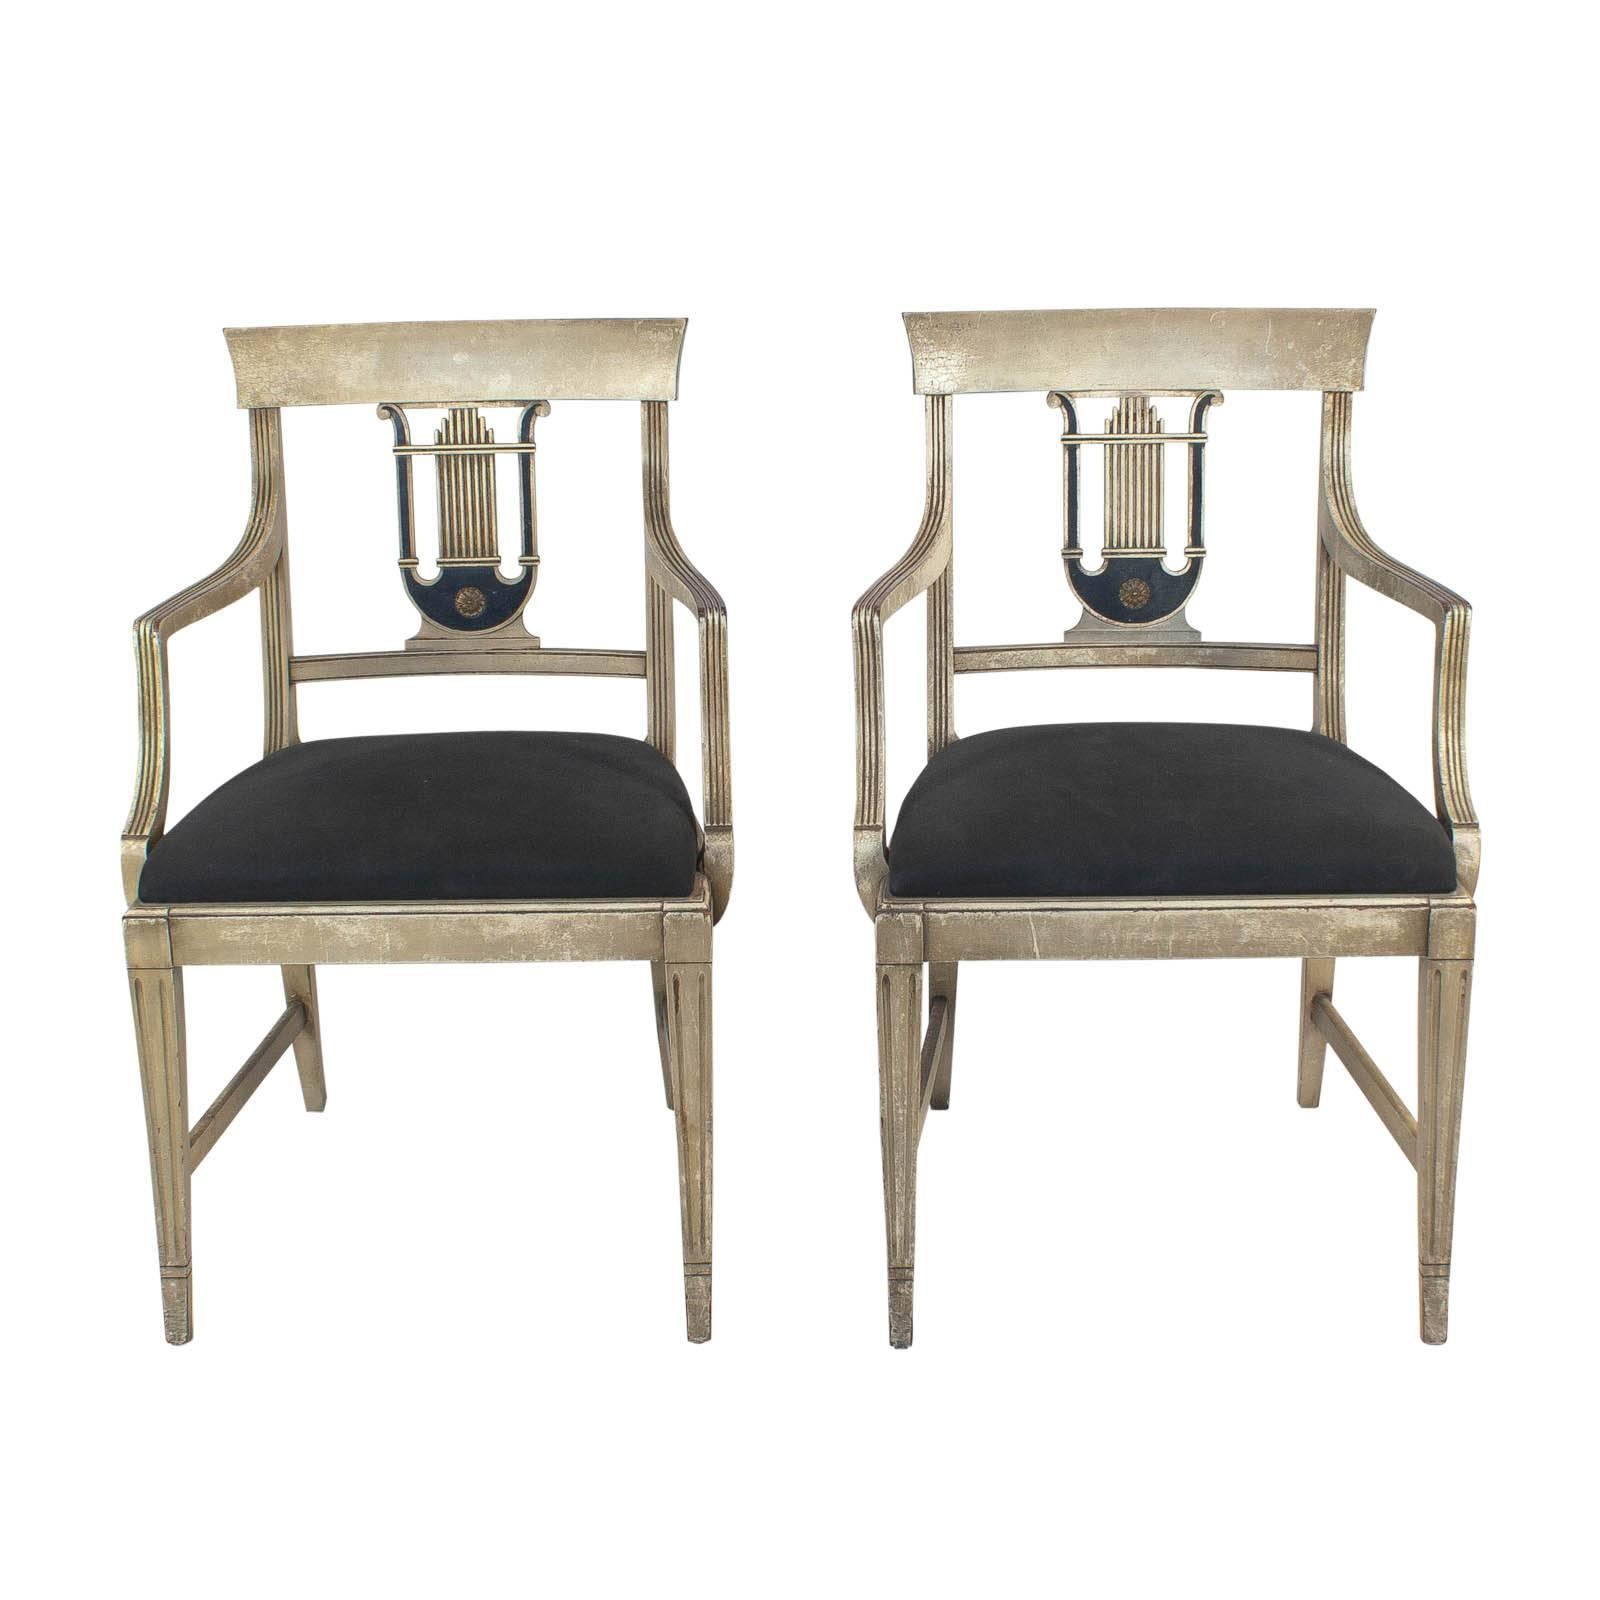 A handsome pair of Hollywood Regency armchairs featuring a carved lyre back a with a good old painted surface. The design was first seen circa 1820 in England but was soon popular all-over the continent. These chairs are solid and comfortable. Best